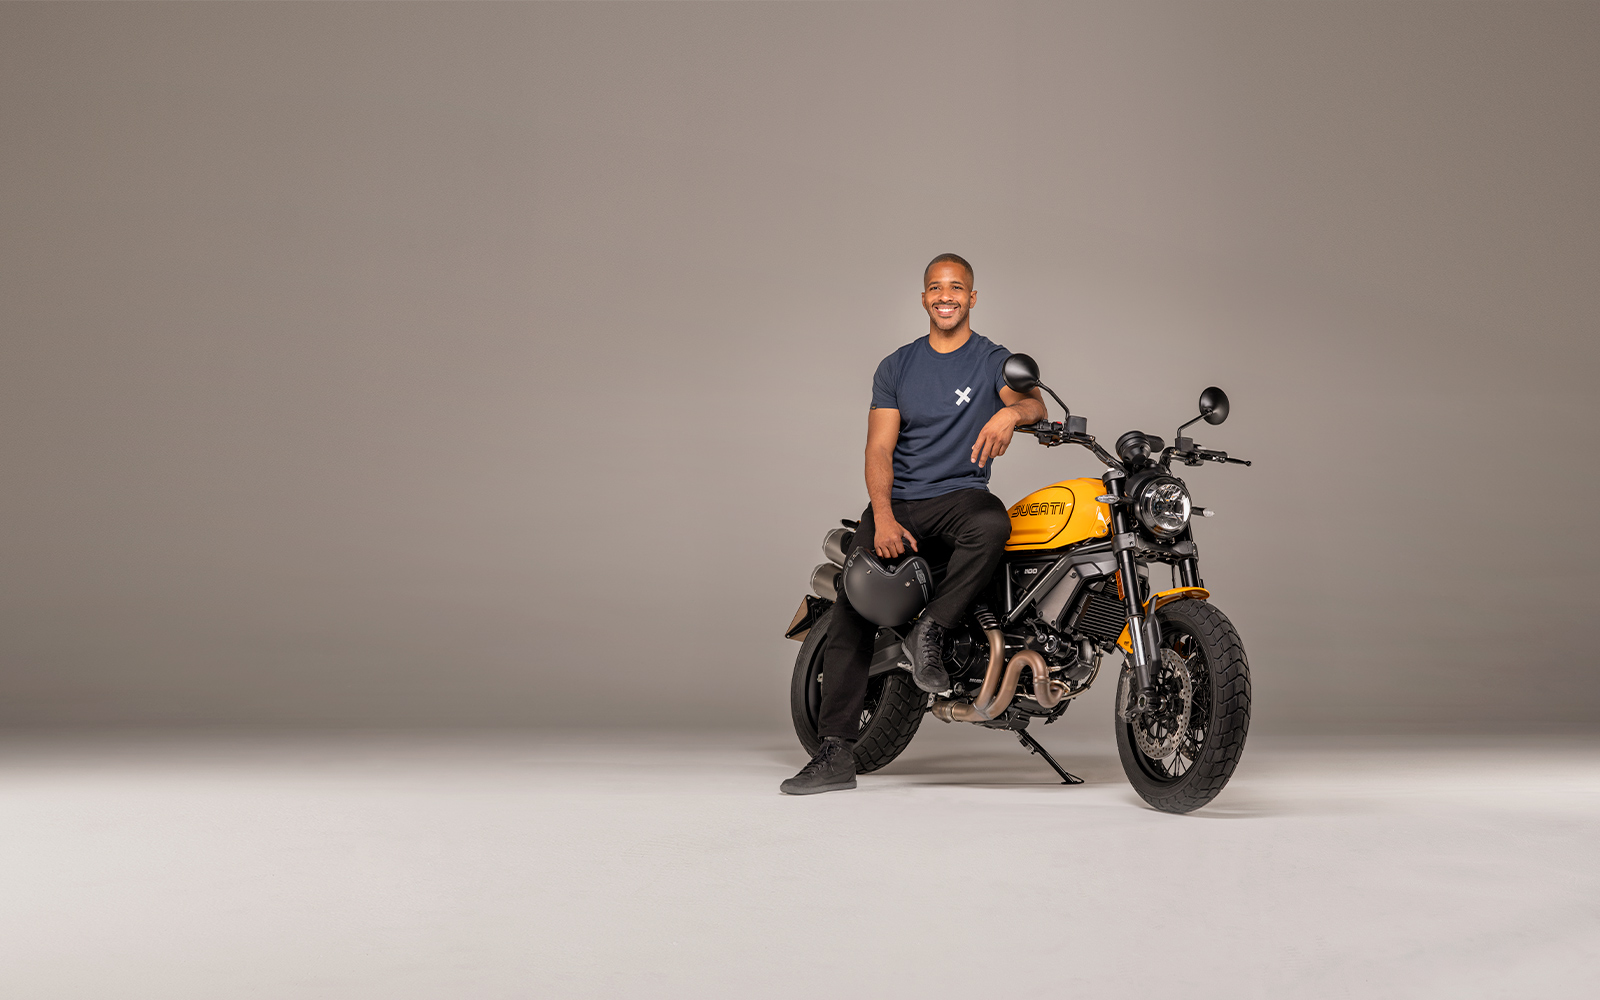 A view of a model astride the Ducati Scrambler 1100 Tribute PRO, as a result of the Ducati World Premiere; Mark Your Roots